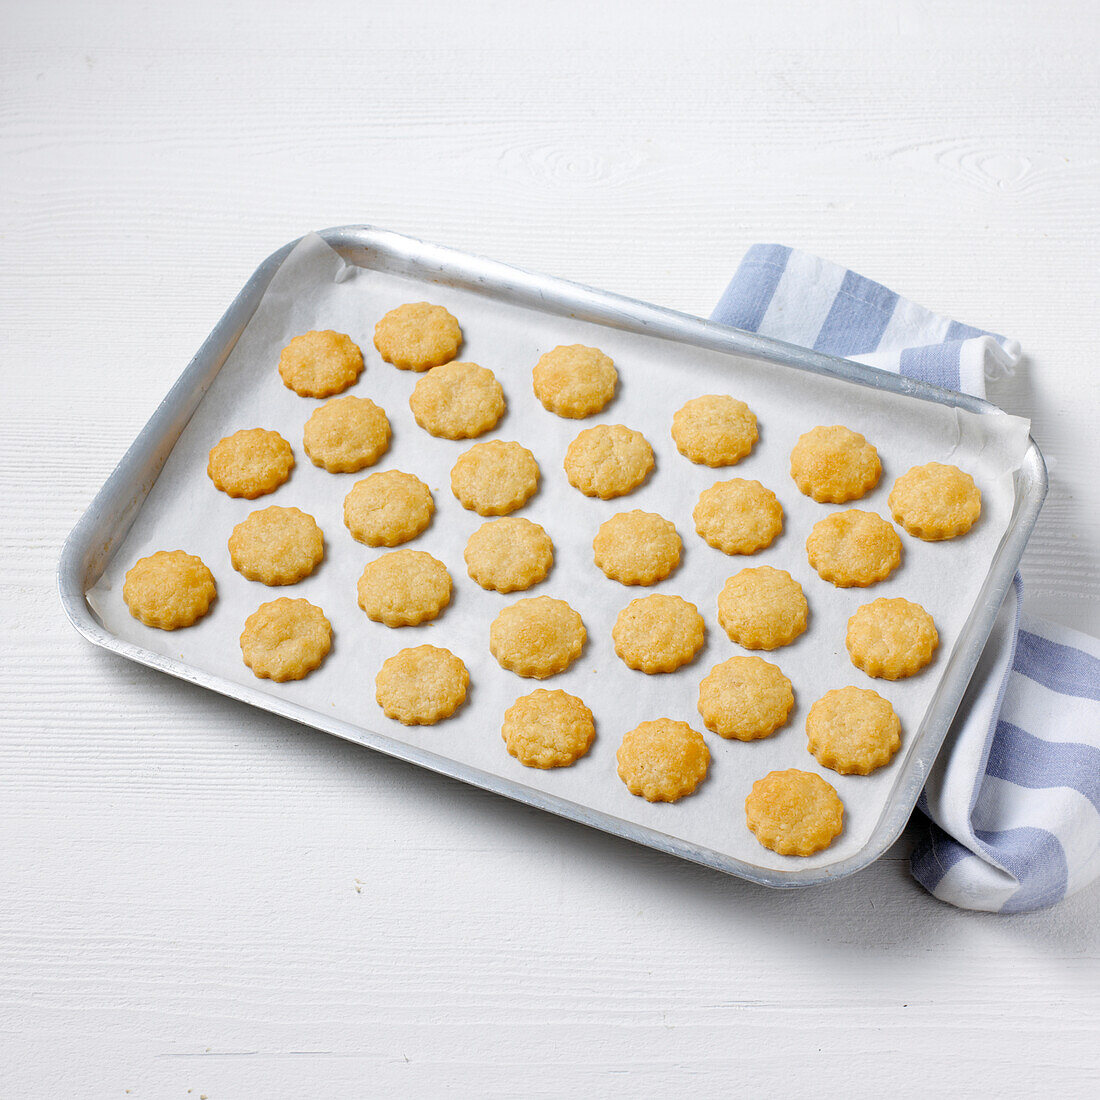 Baked parmesan shortbread canape bases on baking tray